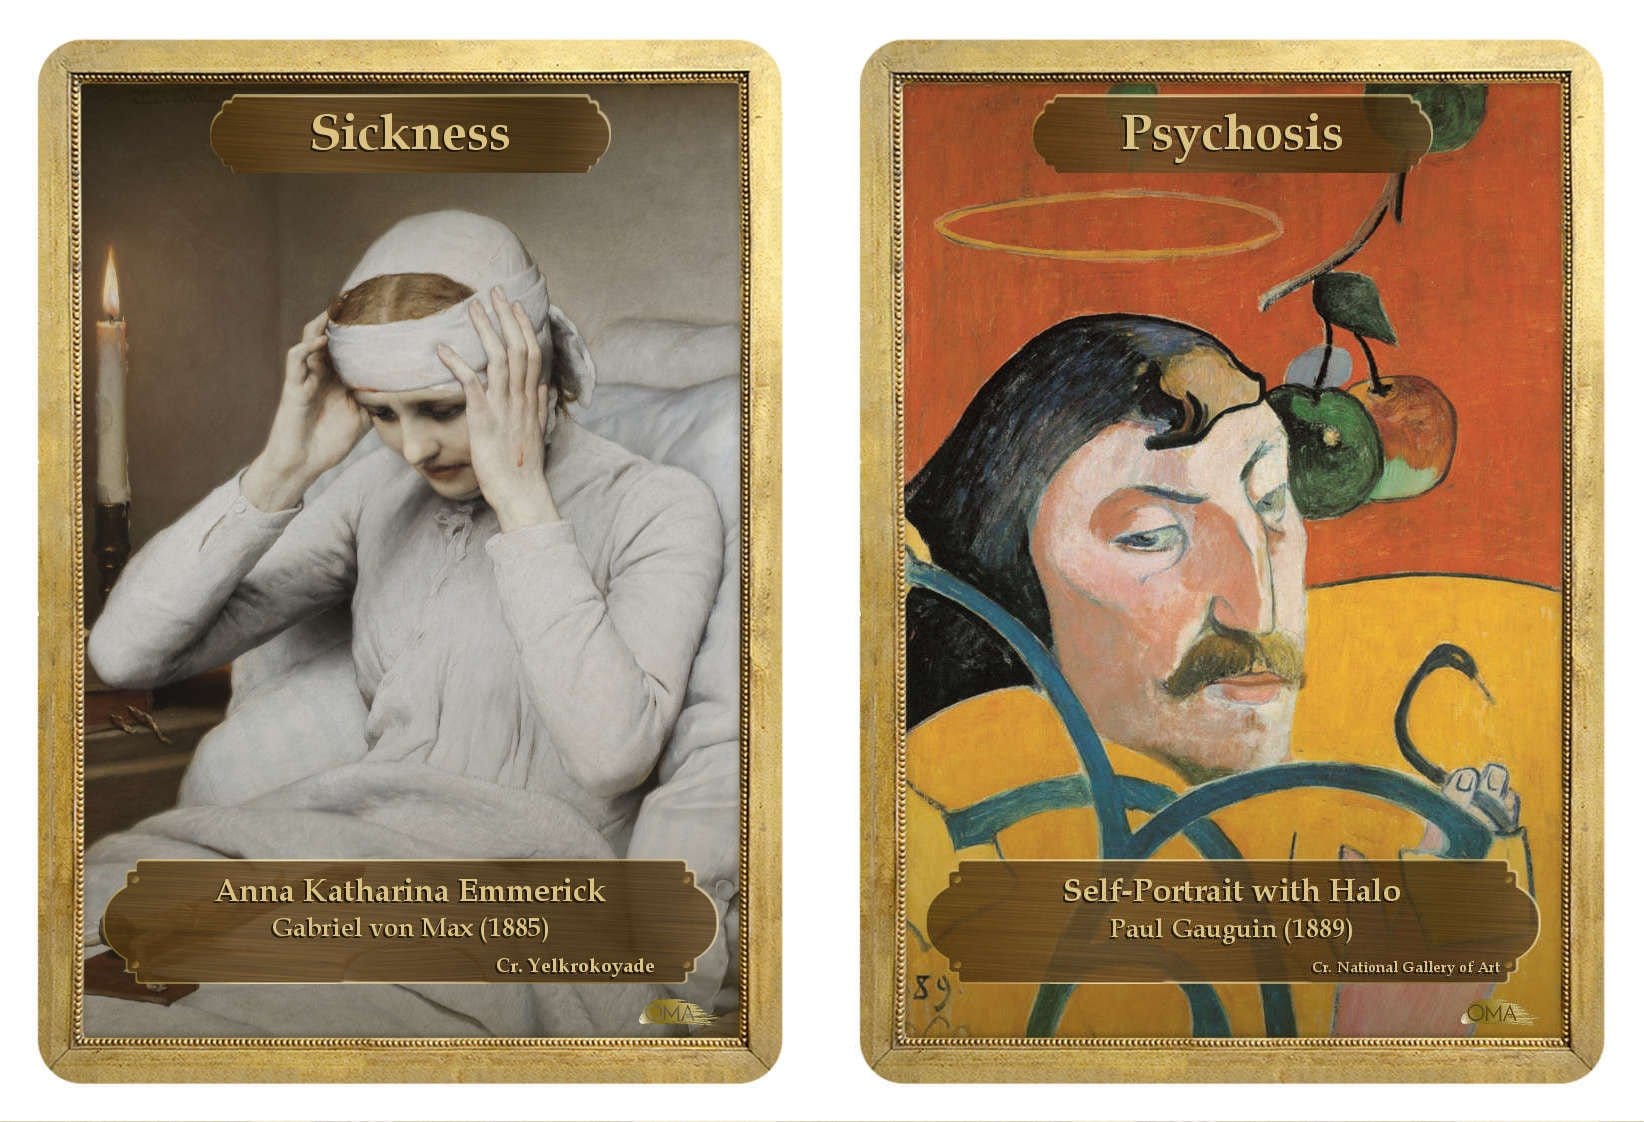 Sickness / Psychosis Double Sided Token - Token - Original Magic Art - Accessories for Magic the Gathering and other card games